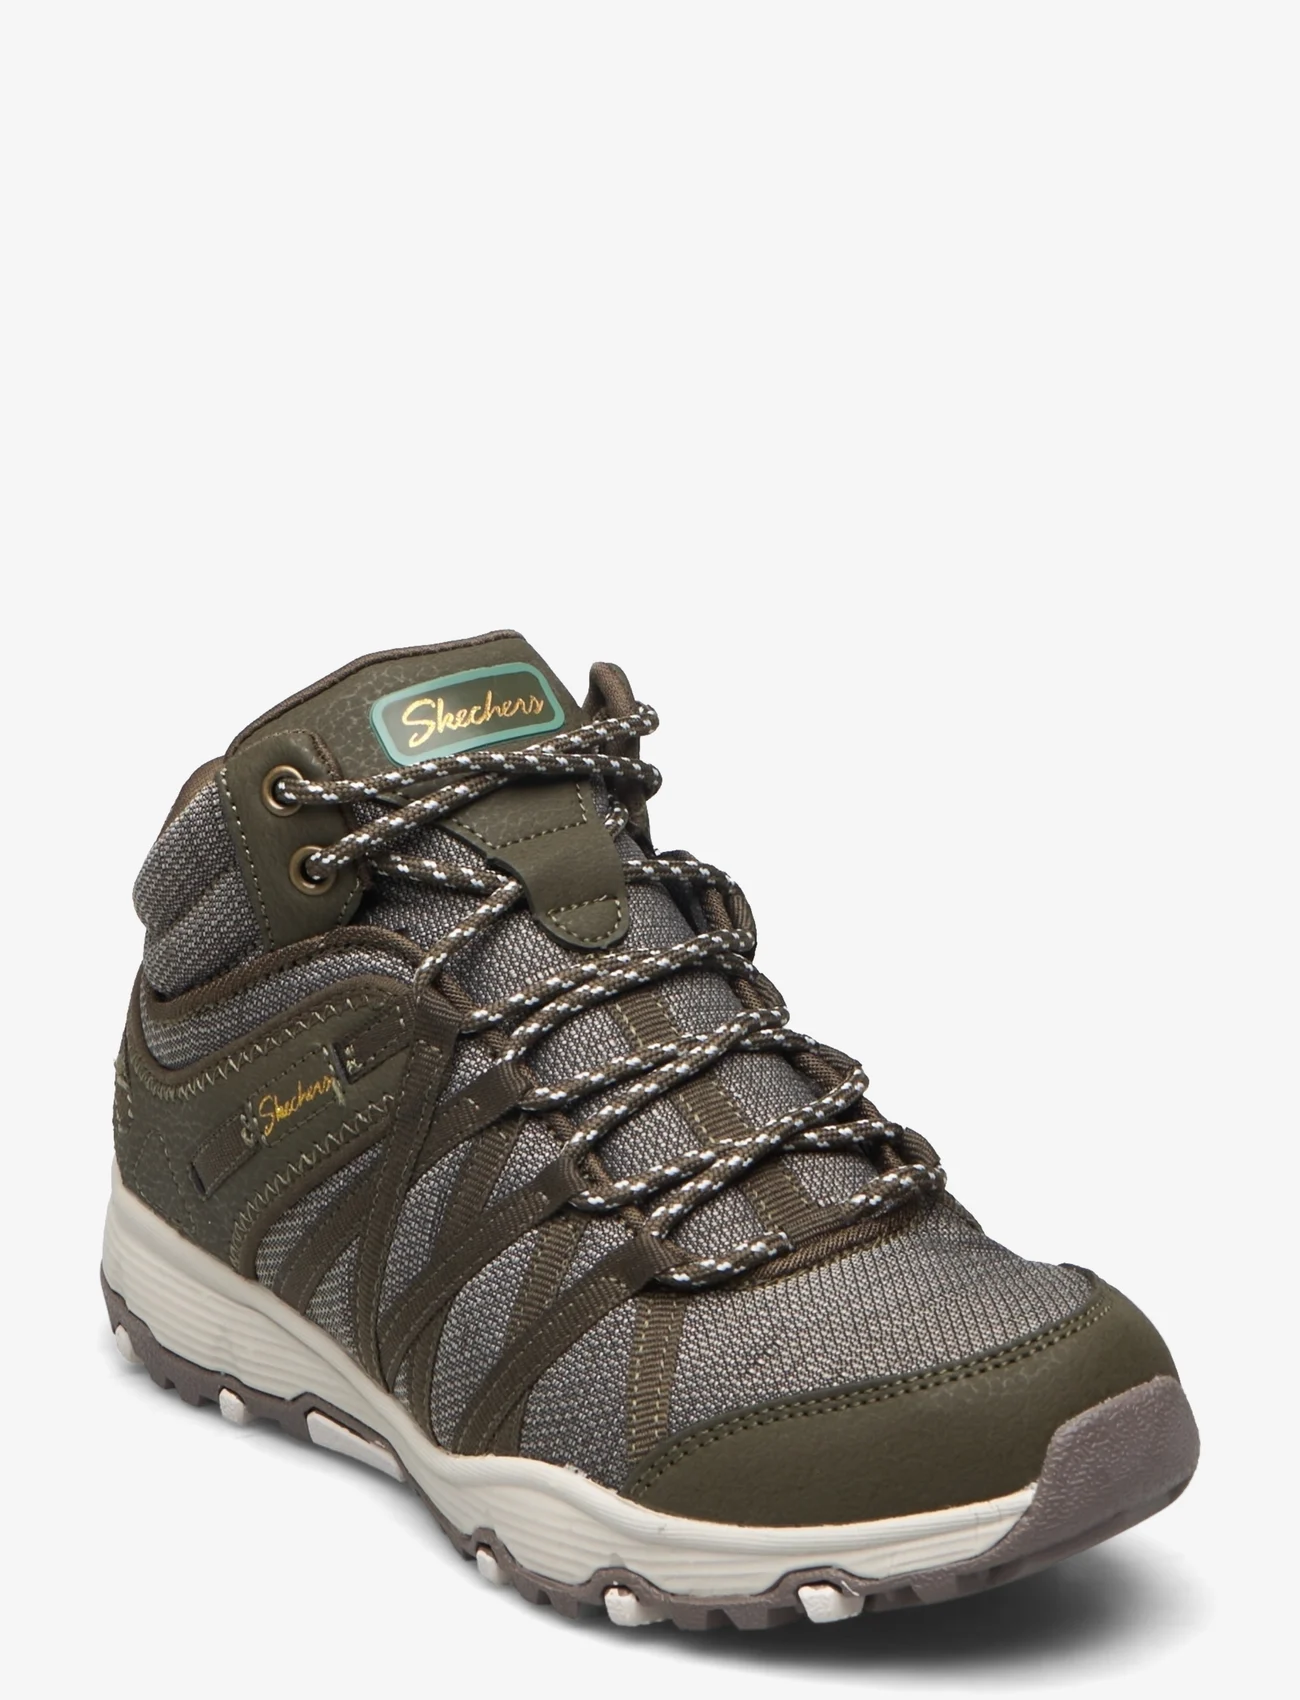 Skechers - Womens Seager Hiker Side to Side -Water Repellent - wanderschuhe - olv olive - 0